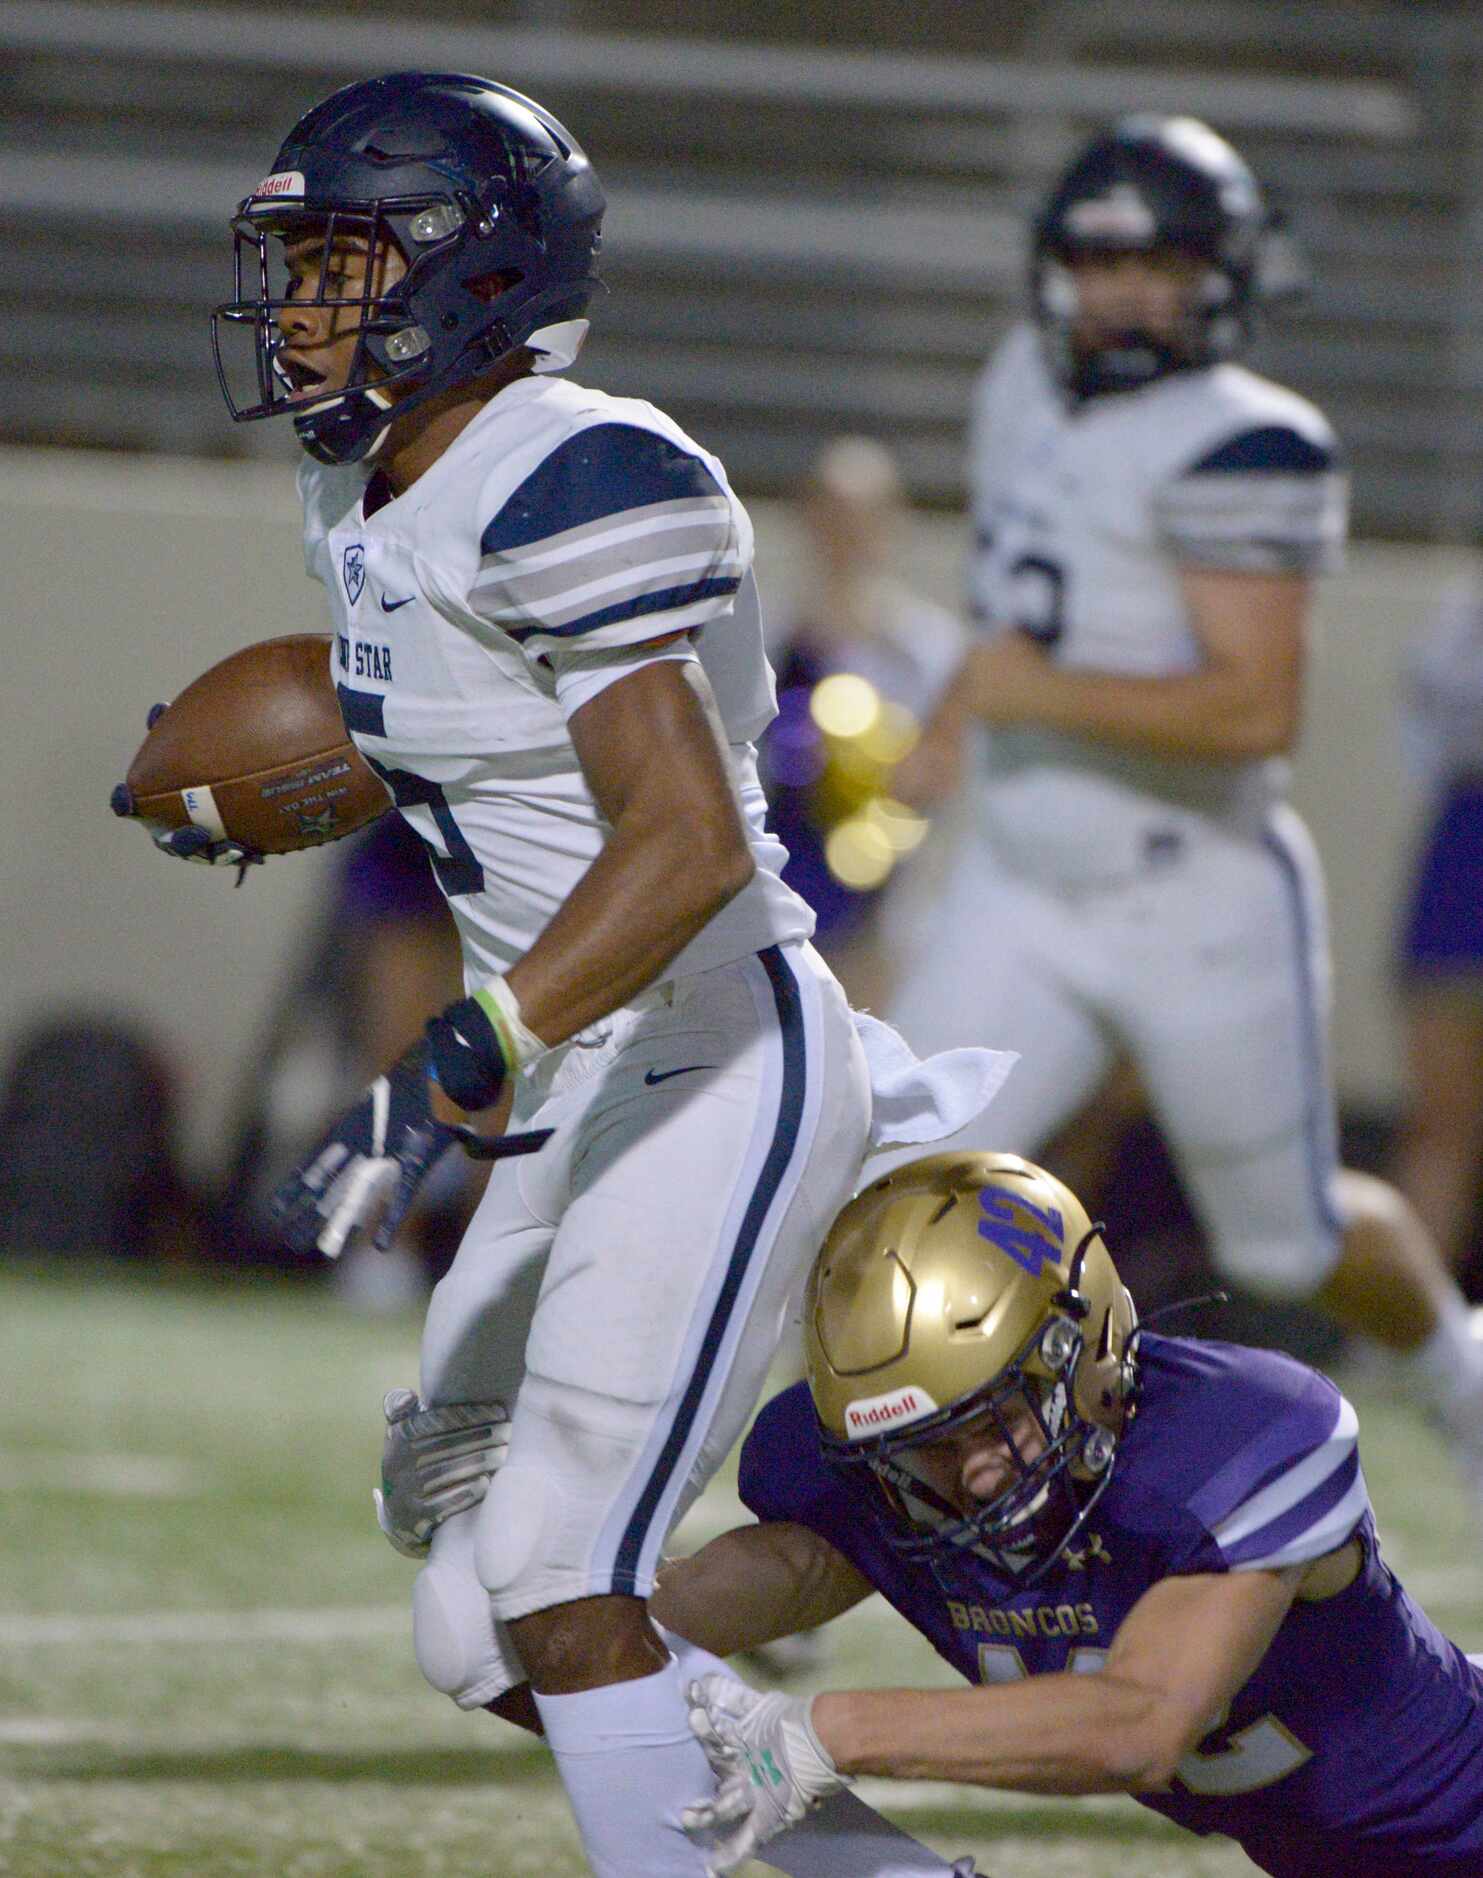 Lone Star’s Jaden Nixon (5) is tackled by Denton’s Amir Fera (42) in the first quarter of a...